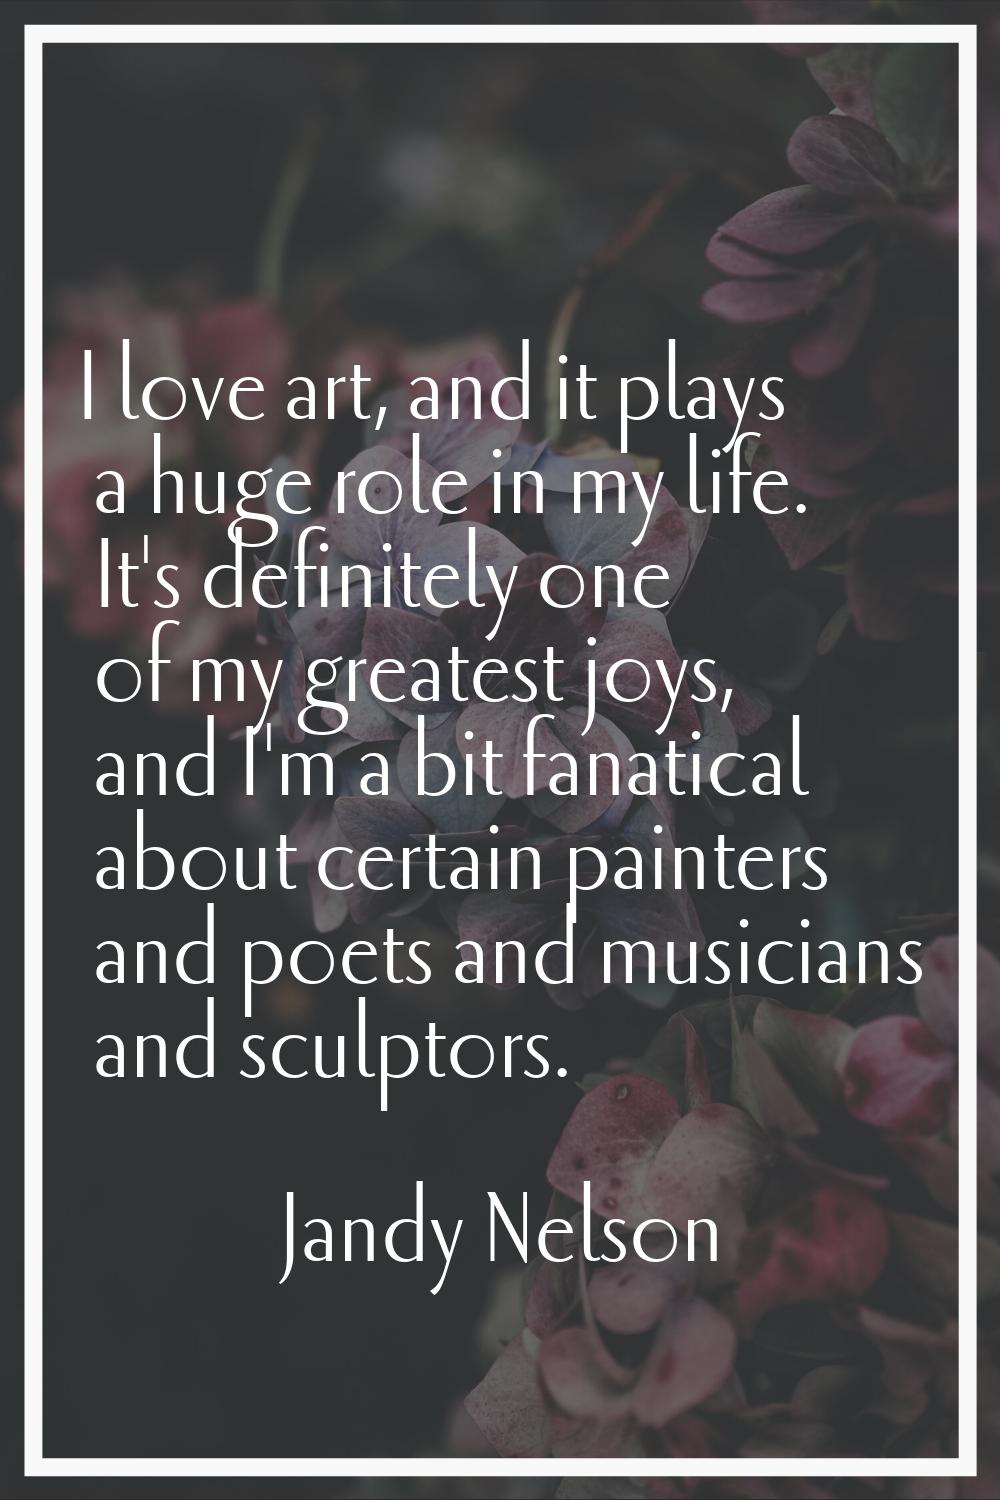 I love art, and it plays a huge role in my life. It's definitely one of my greatest joys, and I'm a